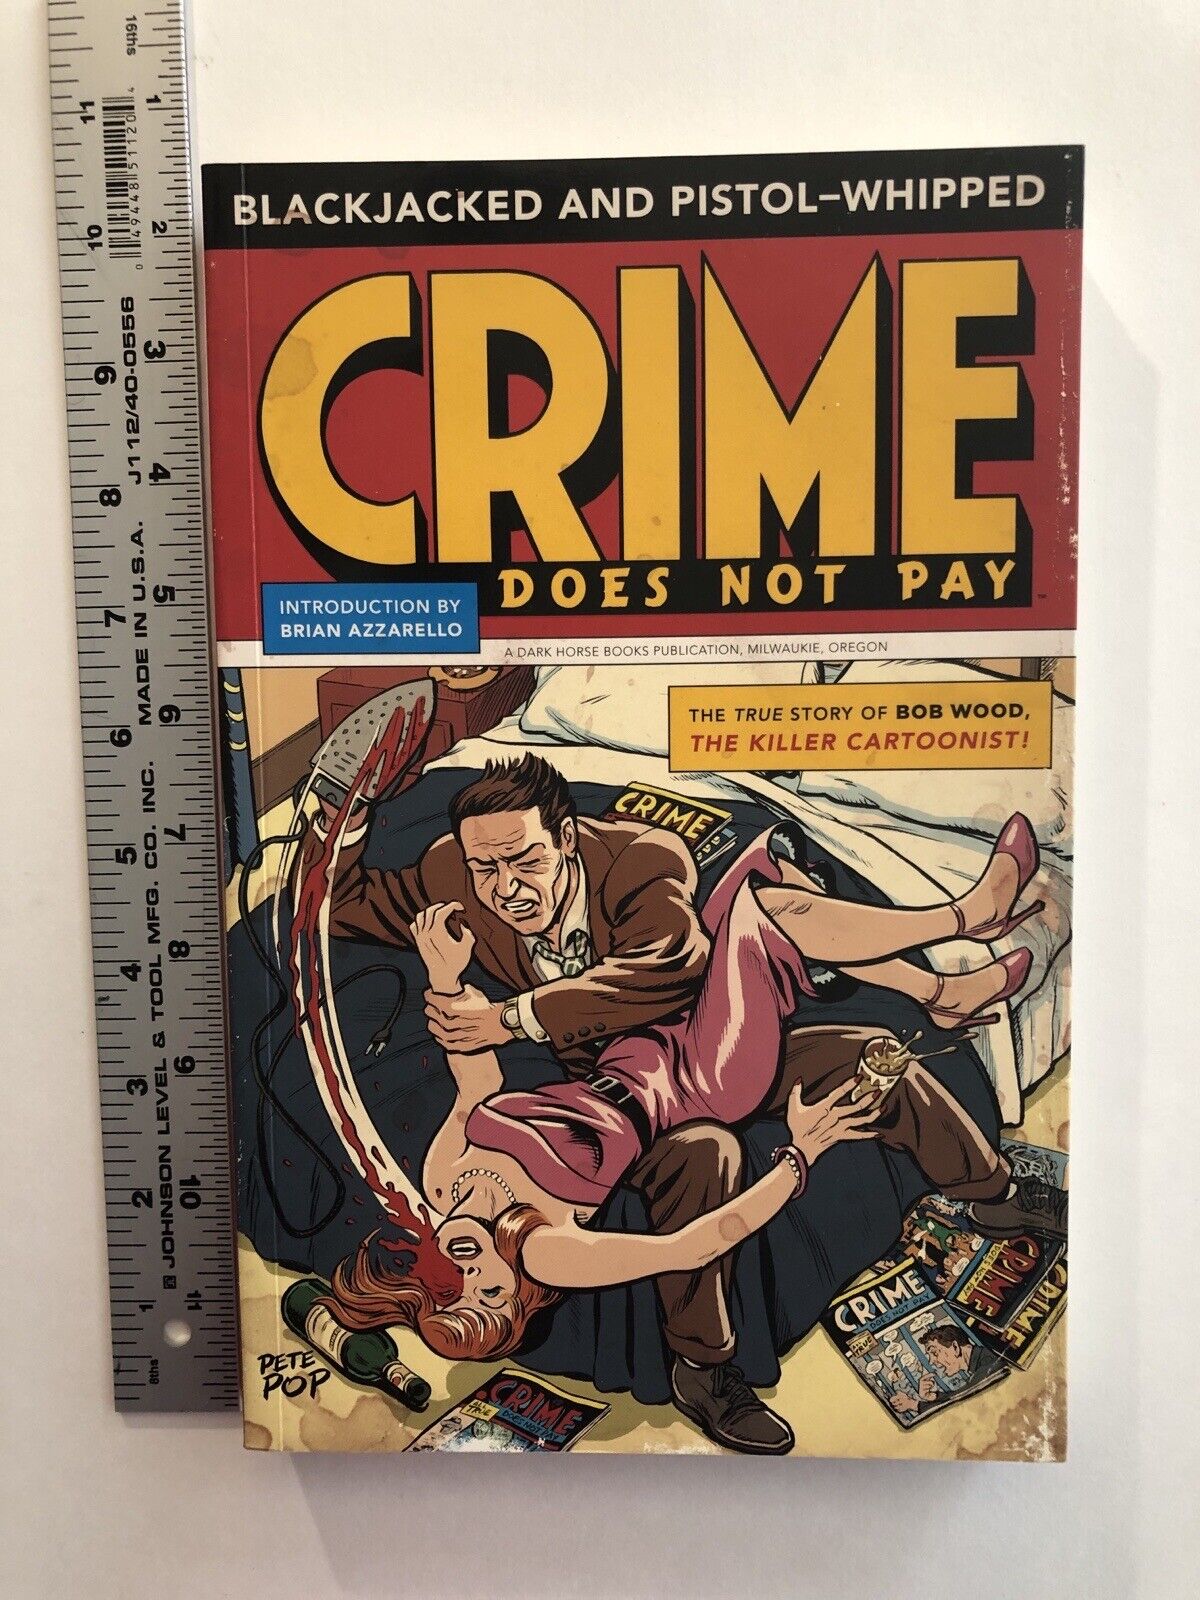 Blackjacked and Pistol-Whipped: Crime Does Not Pay (2011, 1st Ed. Paperback)